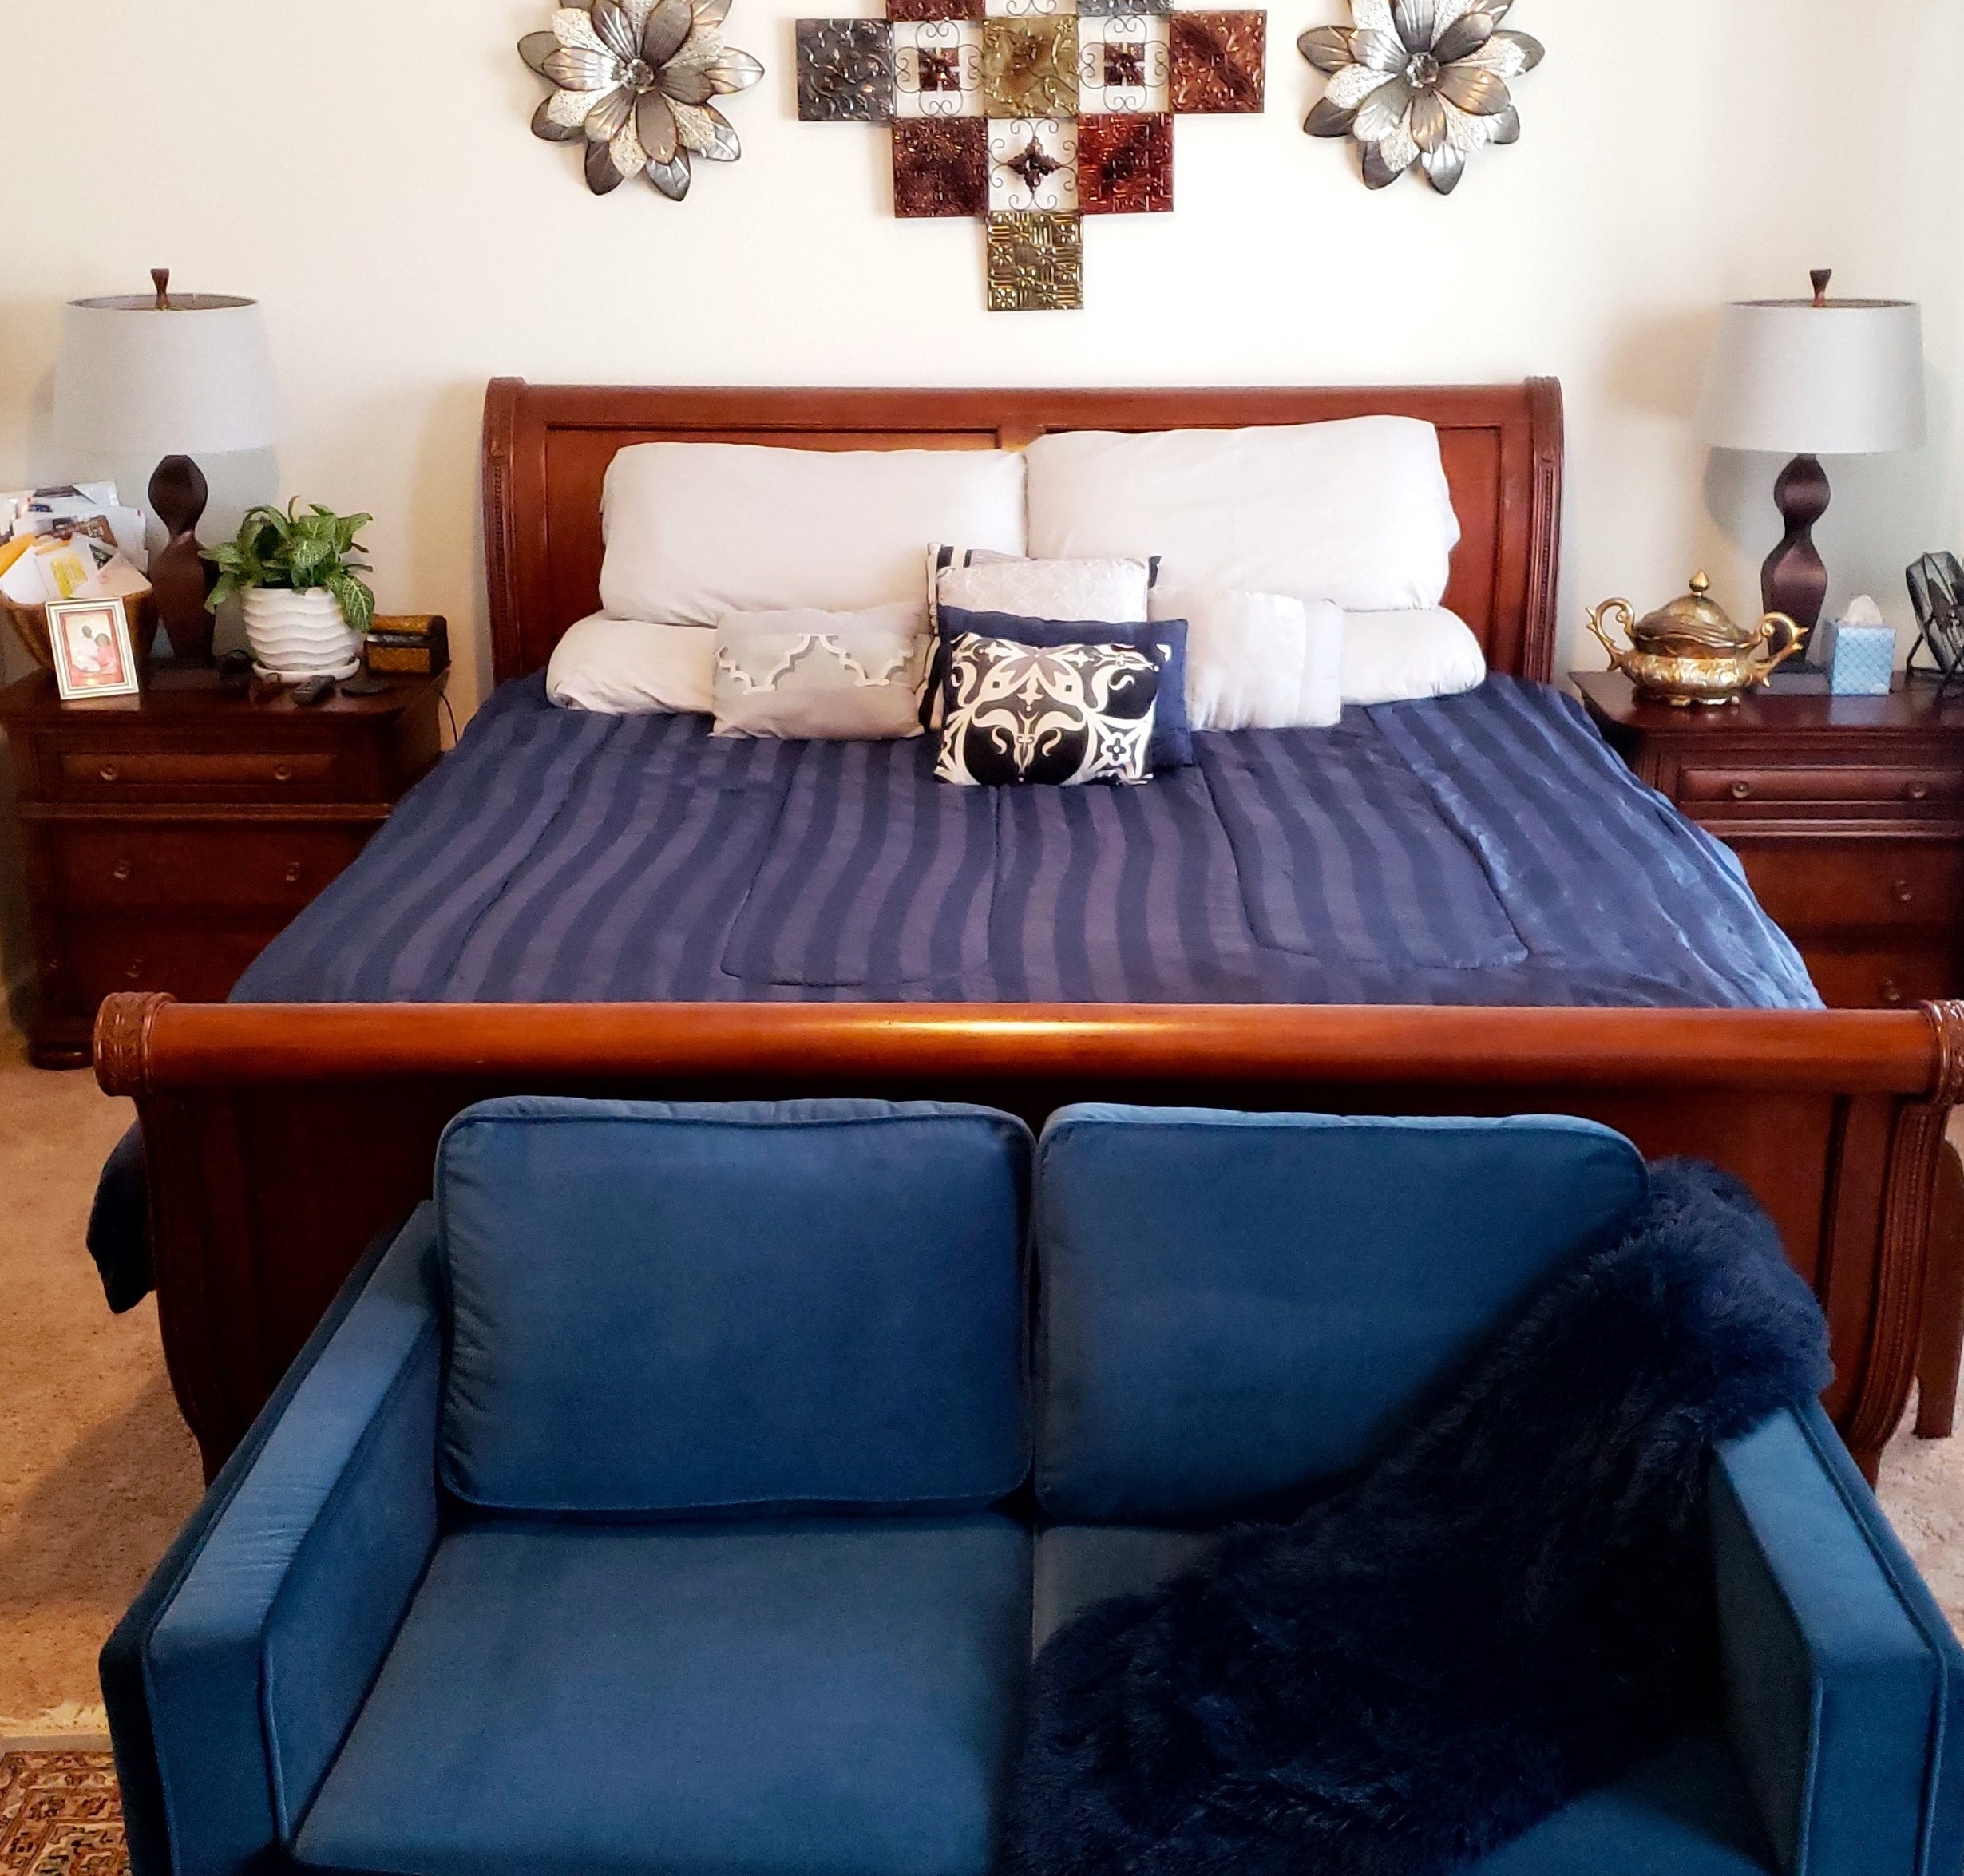 blue two-seat loveseat with square arms and wood legs